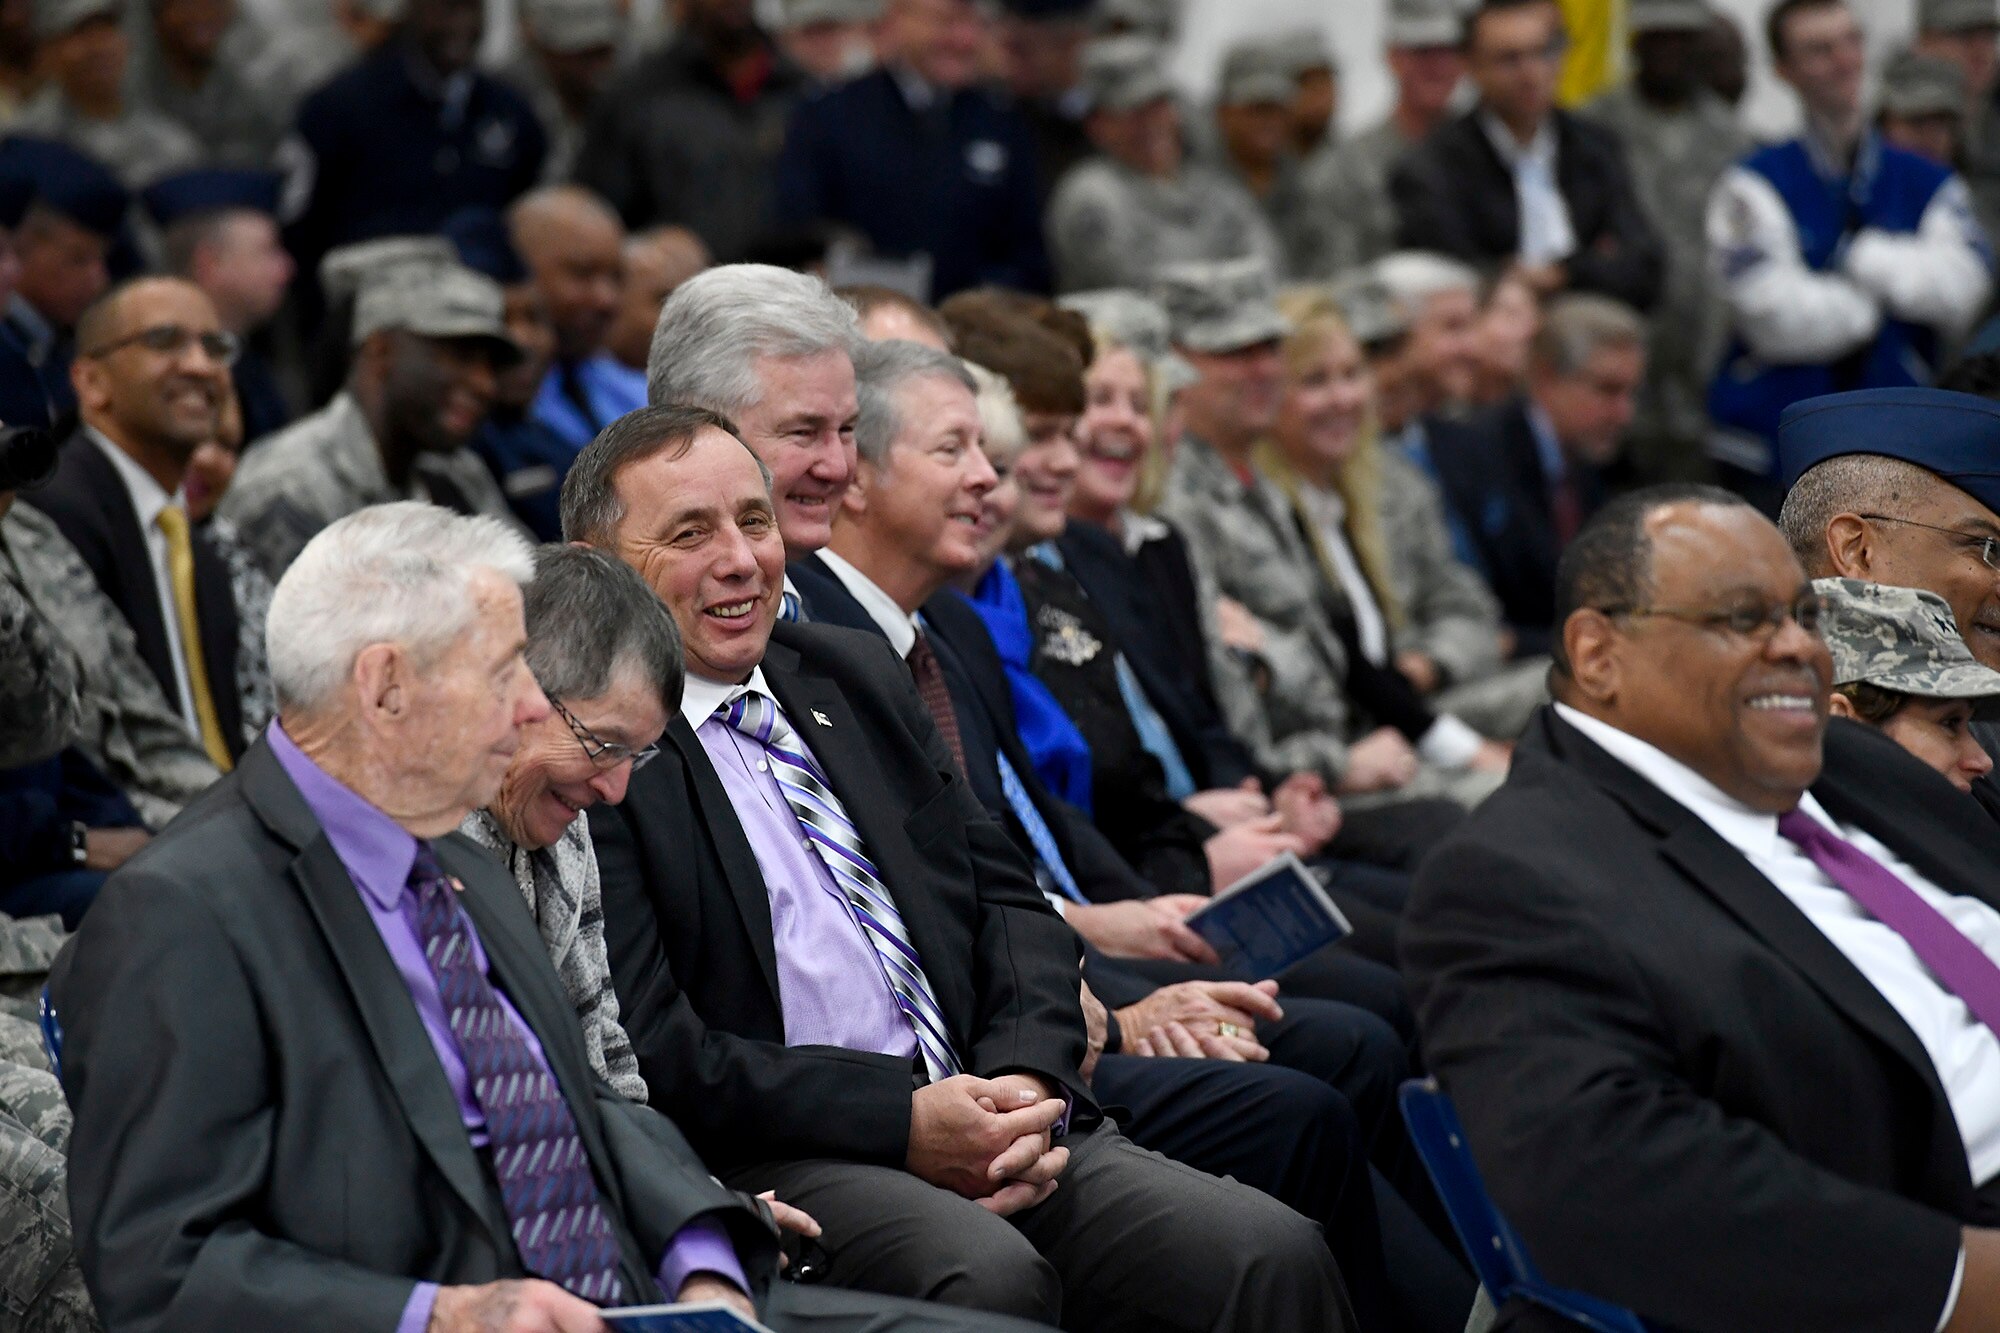 Some of the former chief master sergeants of the Air Force attend a retirement and appointment ceremony in honor of Chief Master Sgt. of the Air Force James A. Cody and Chief Master Sgt. Kaleth O. Wright on Joint Base Andrews, Md., Feb. 17, 2017. Cody retired after 32 years of service and was succeeded by Wright, the 18th Airman to hold the position. (U.S. Air Force photo/Scott M. Ash)